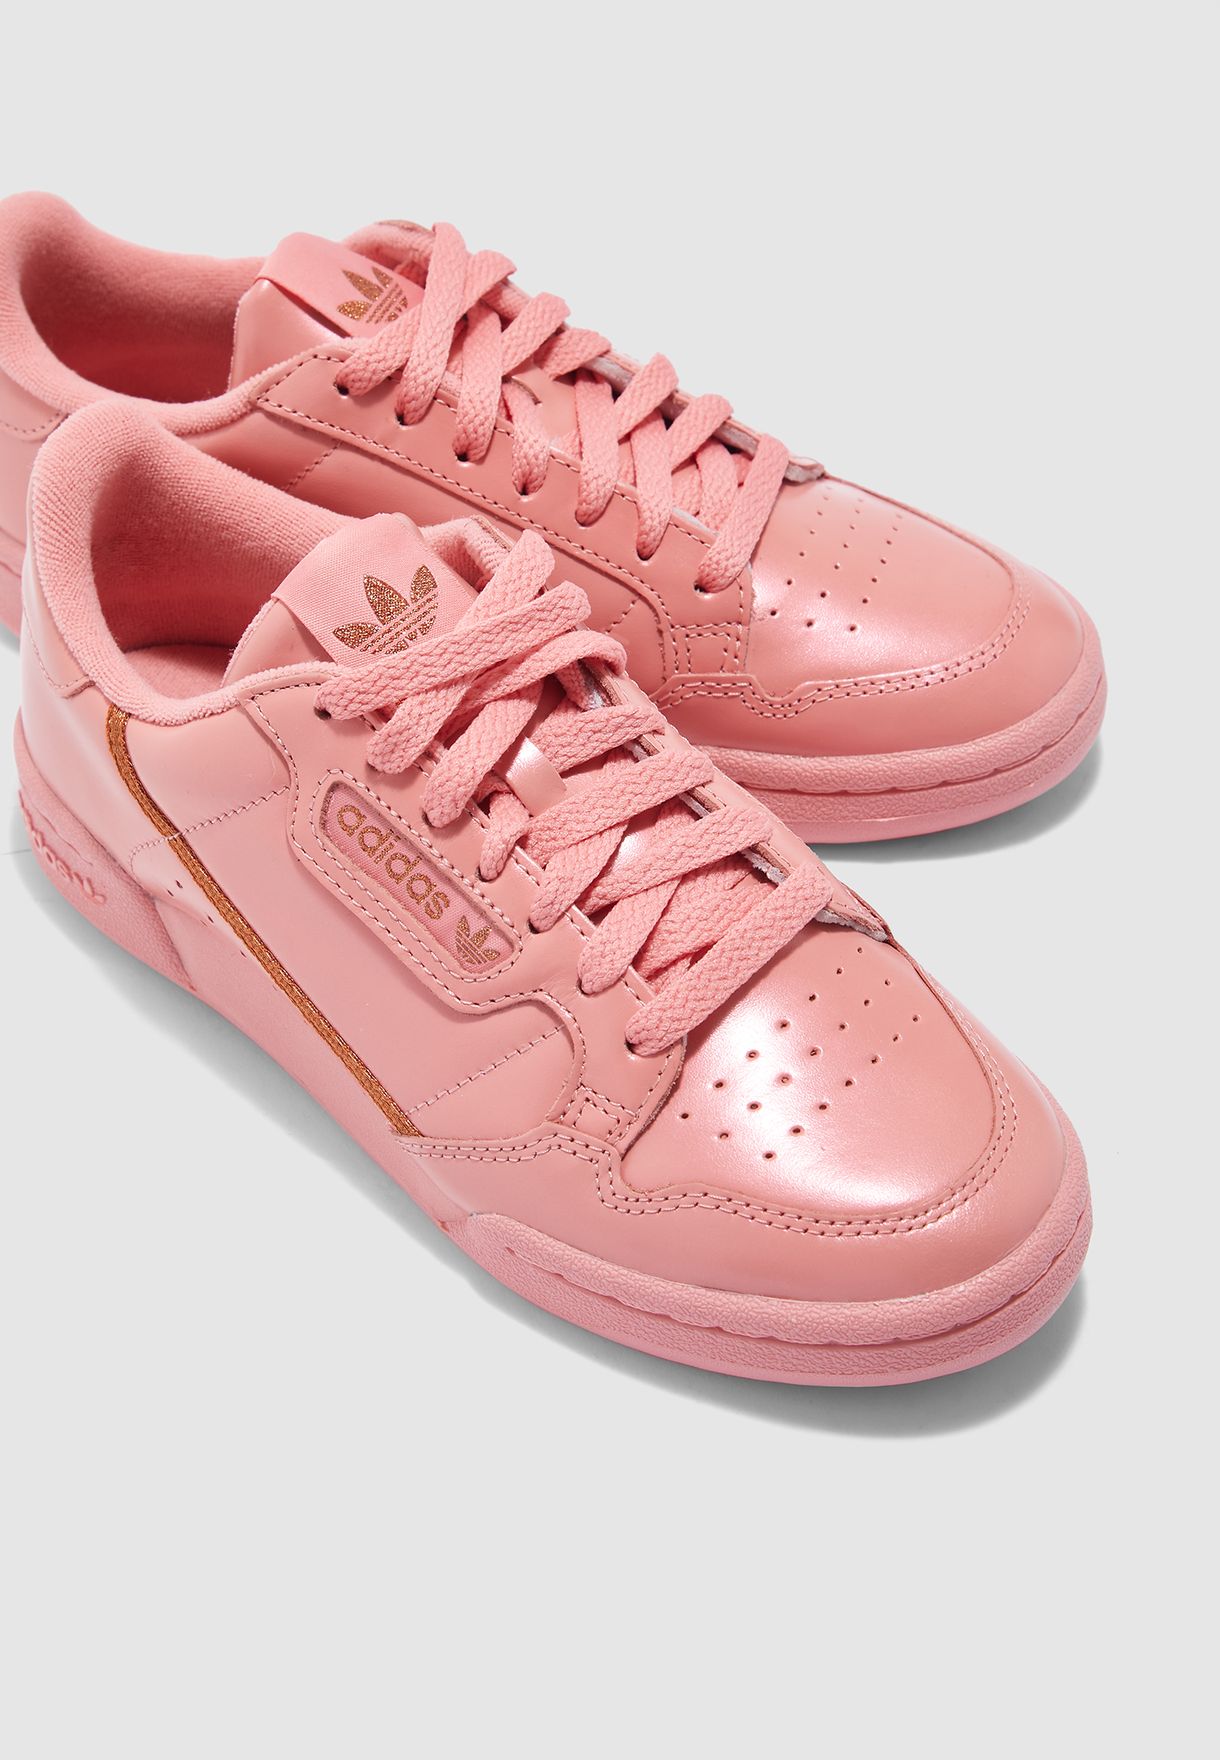 continental 80 shoes pink